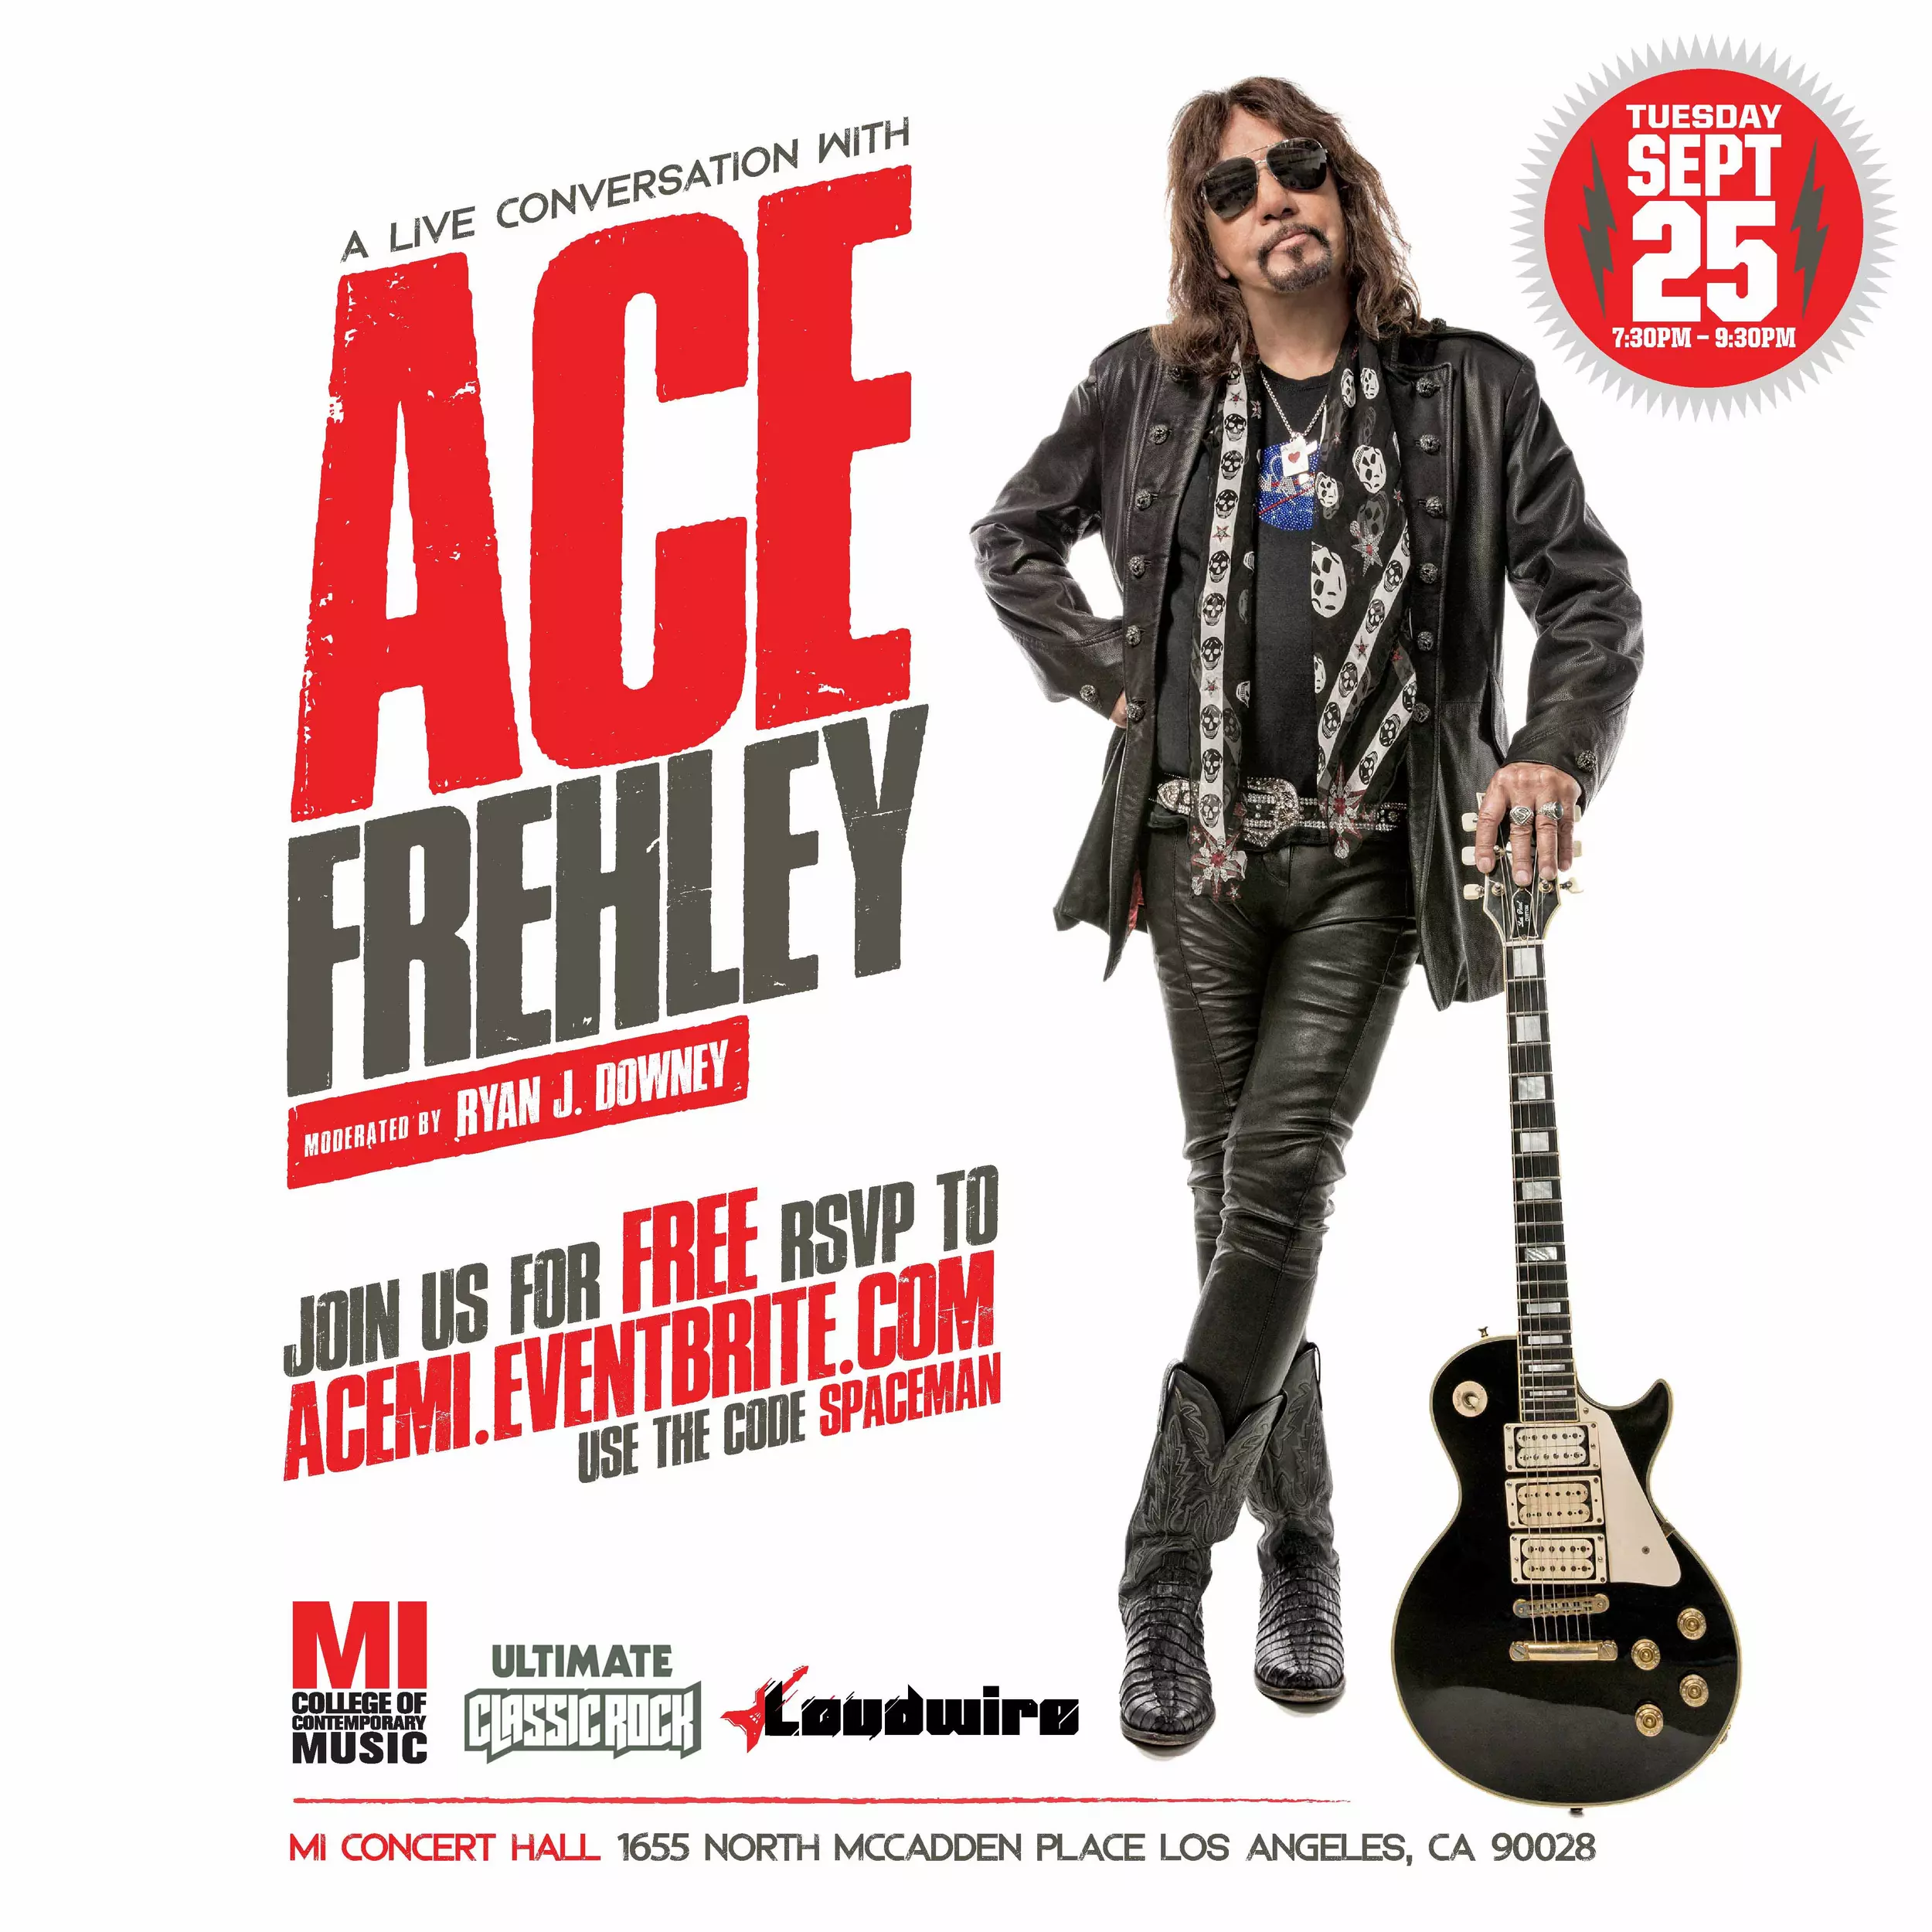 Ultimate Classic Rock to Co-Host Conversation With Ace Frehley